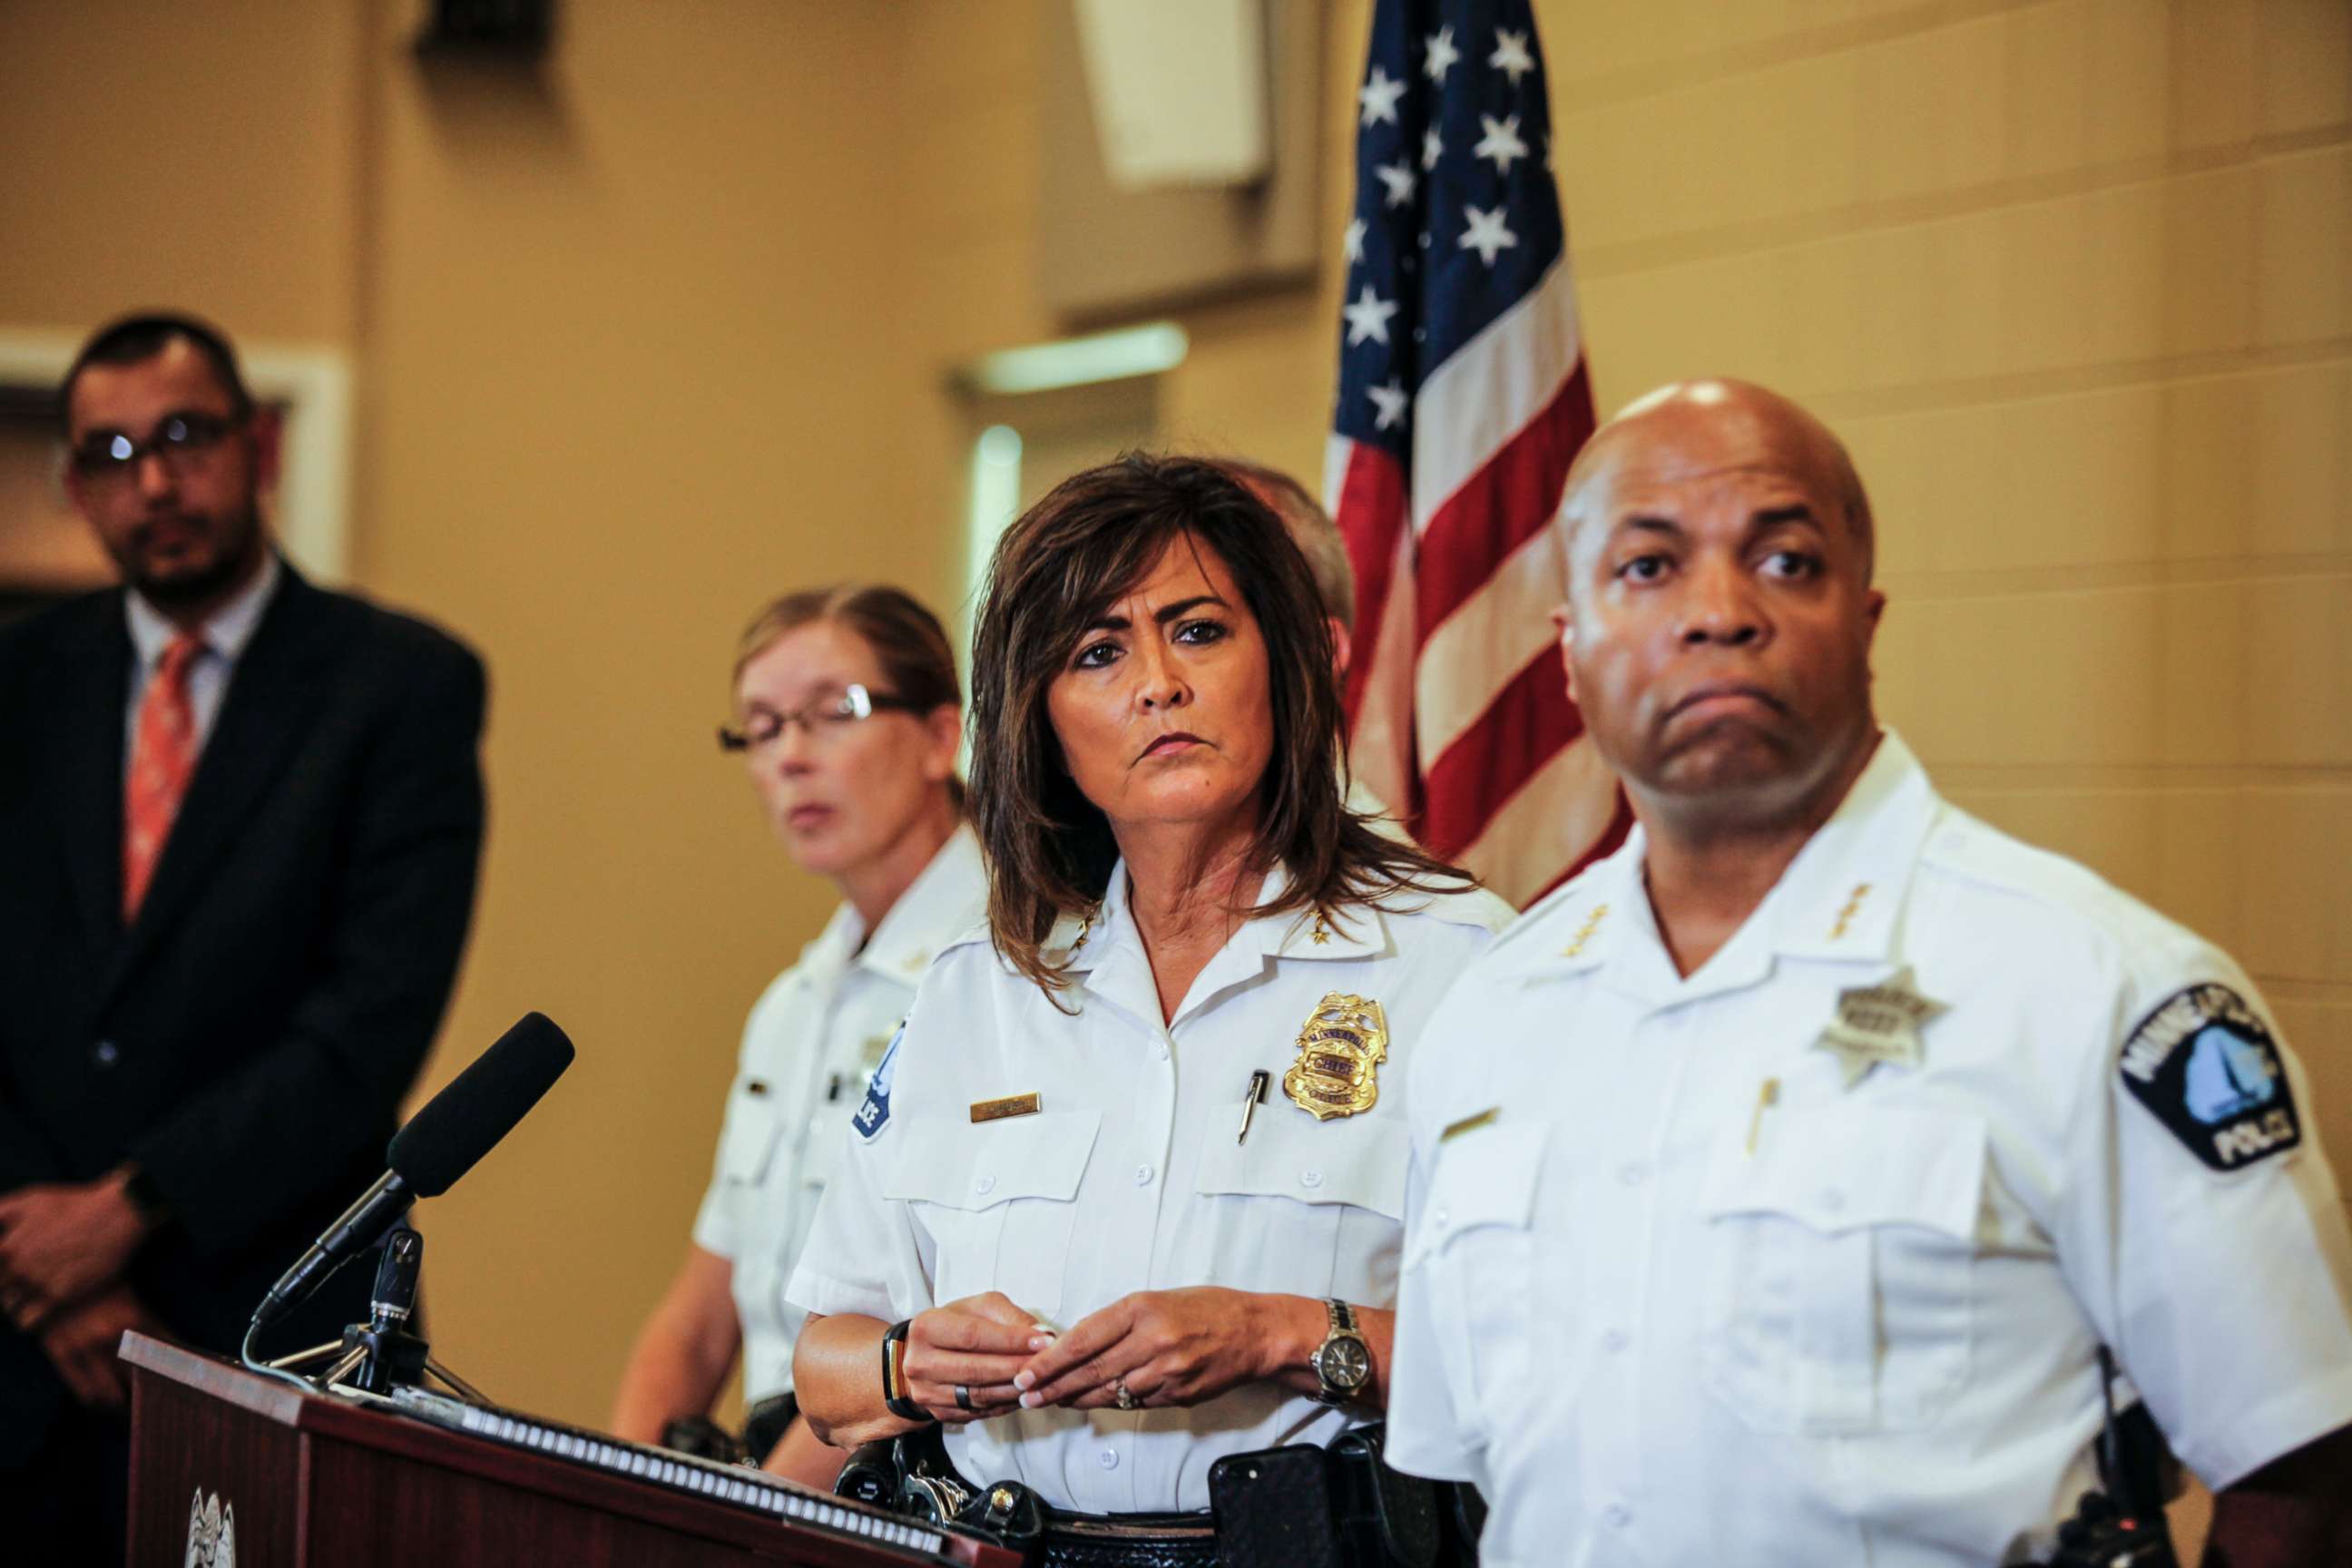 PHOTO: Minneapolis police chief Janeé Harteau, center, stands with police inspector Kathy Waite, left, and assistant chief Medaria Arradondo during a news conference, July 20, 2017, Minneapolis.